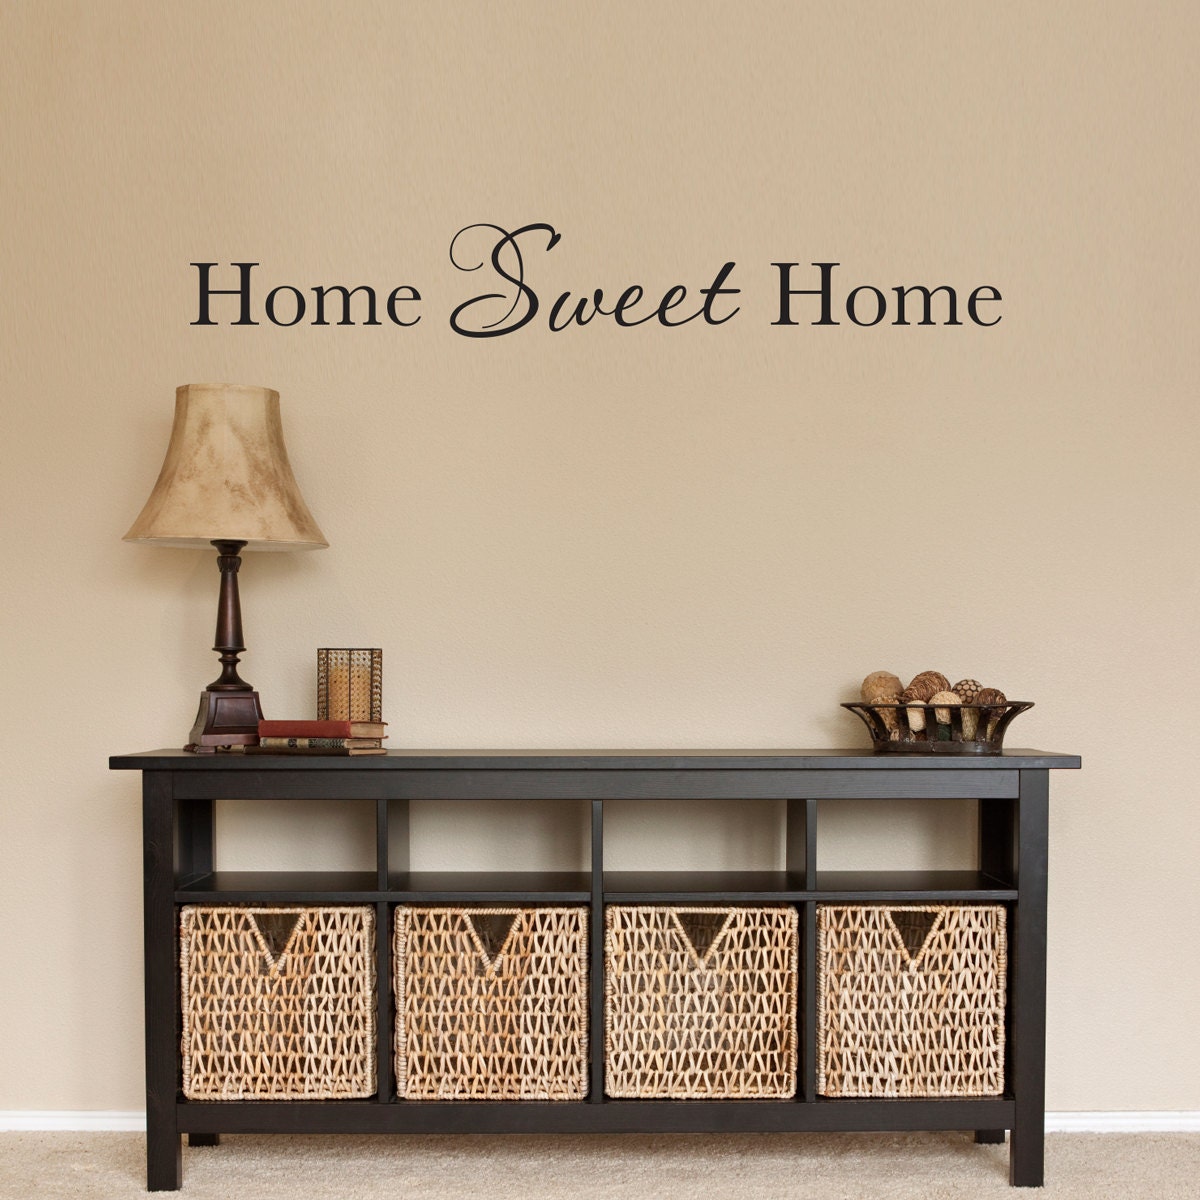 Home Sweet Home Wall Decal - Phrase Decal - Large - StephenEdwardGraphic